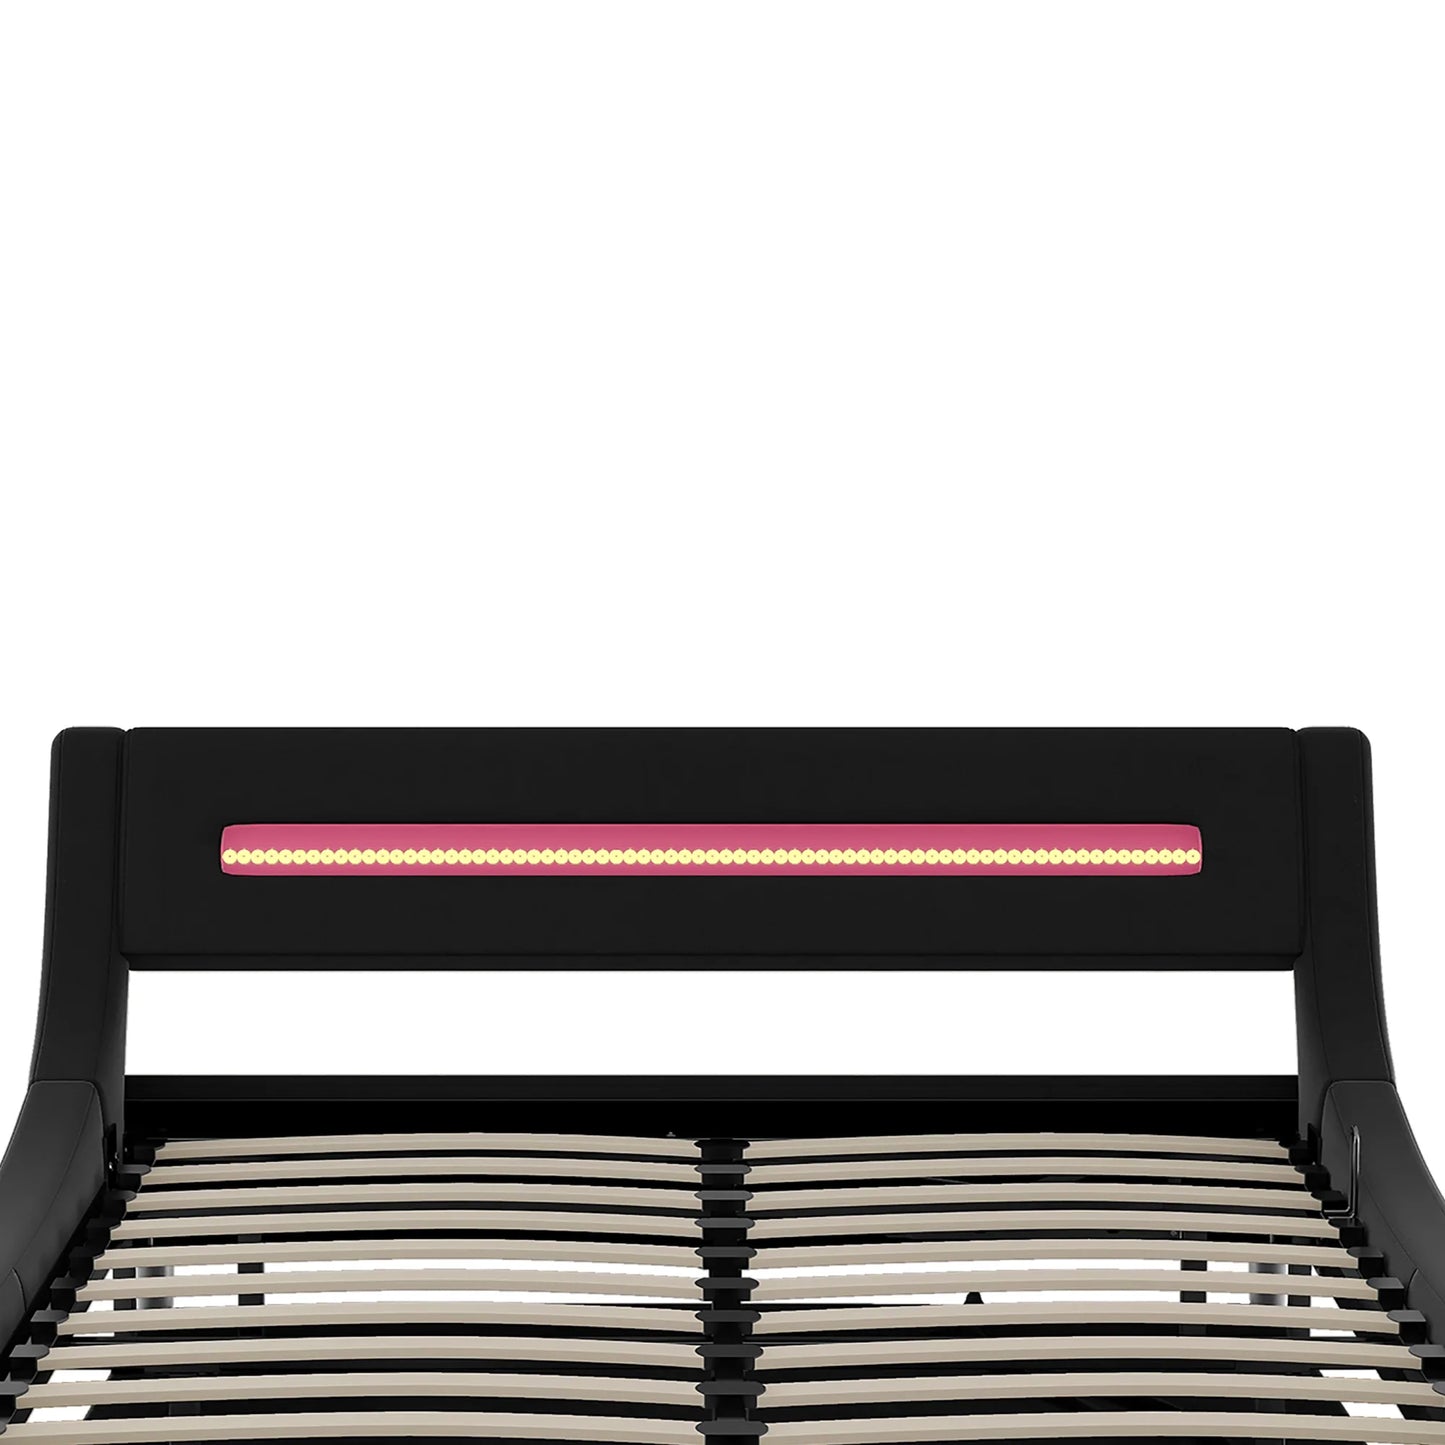 Bed Platform with LED headboard in Queen Black